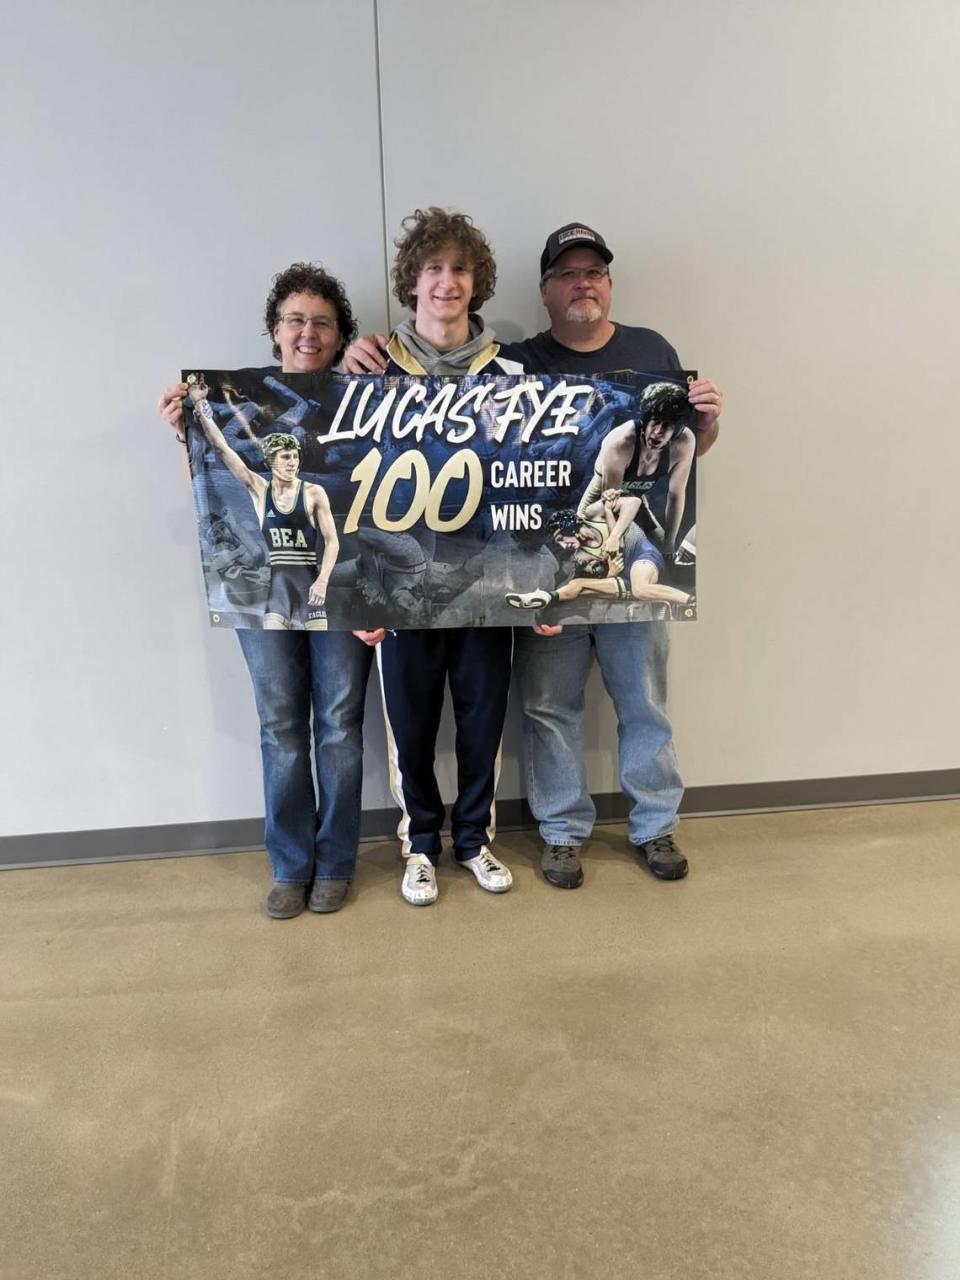 Bald Eagle Area’s Lucas Fye celebrates his 100th career win with his parents, Deanne and Shawn. Fye pinned Butler’s Sullivan Stutz in 1:34 of their first round match of the Mid Winter Mayhem on Friday.